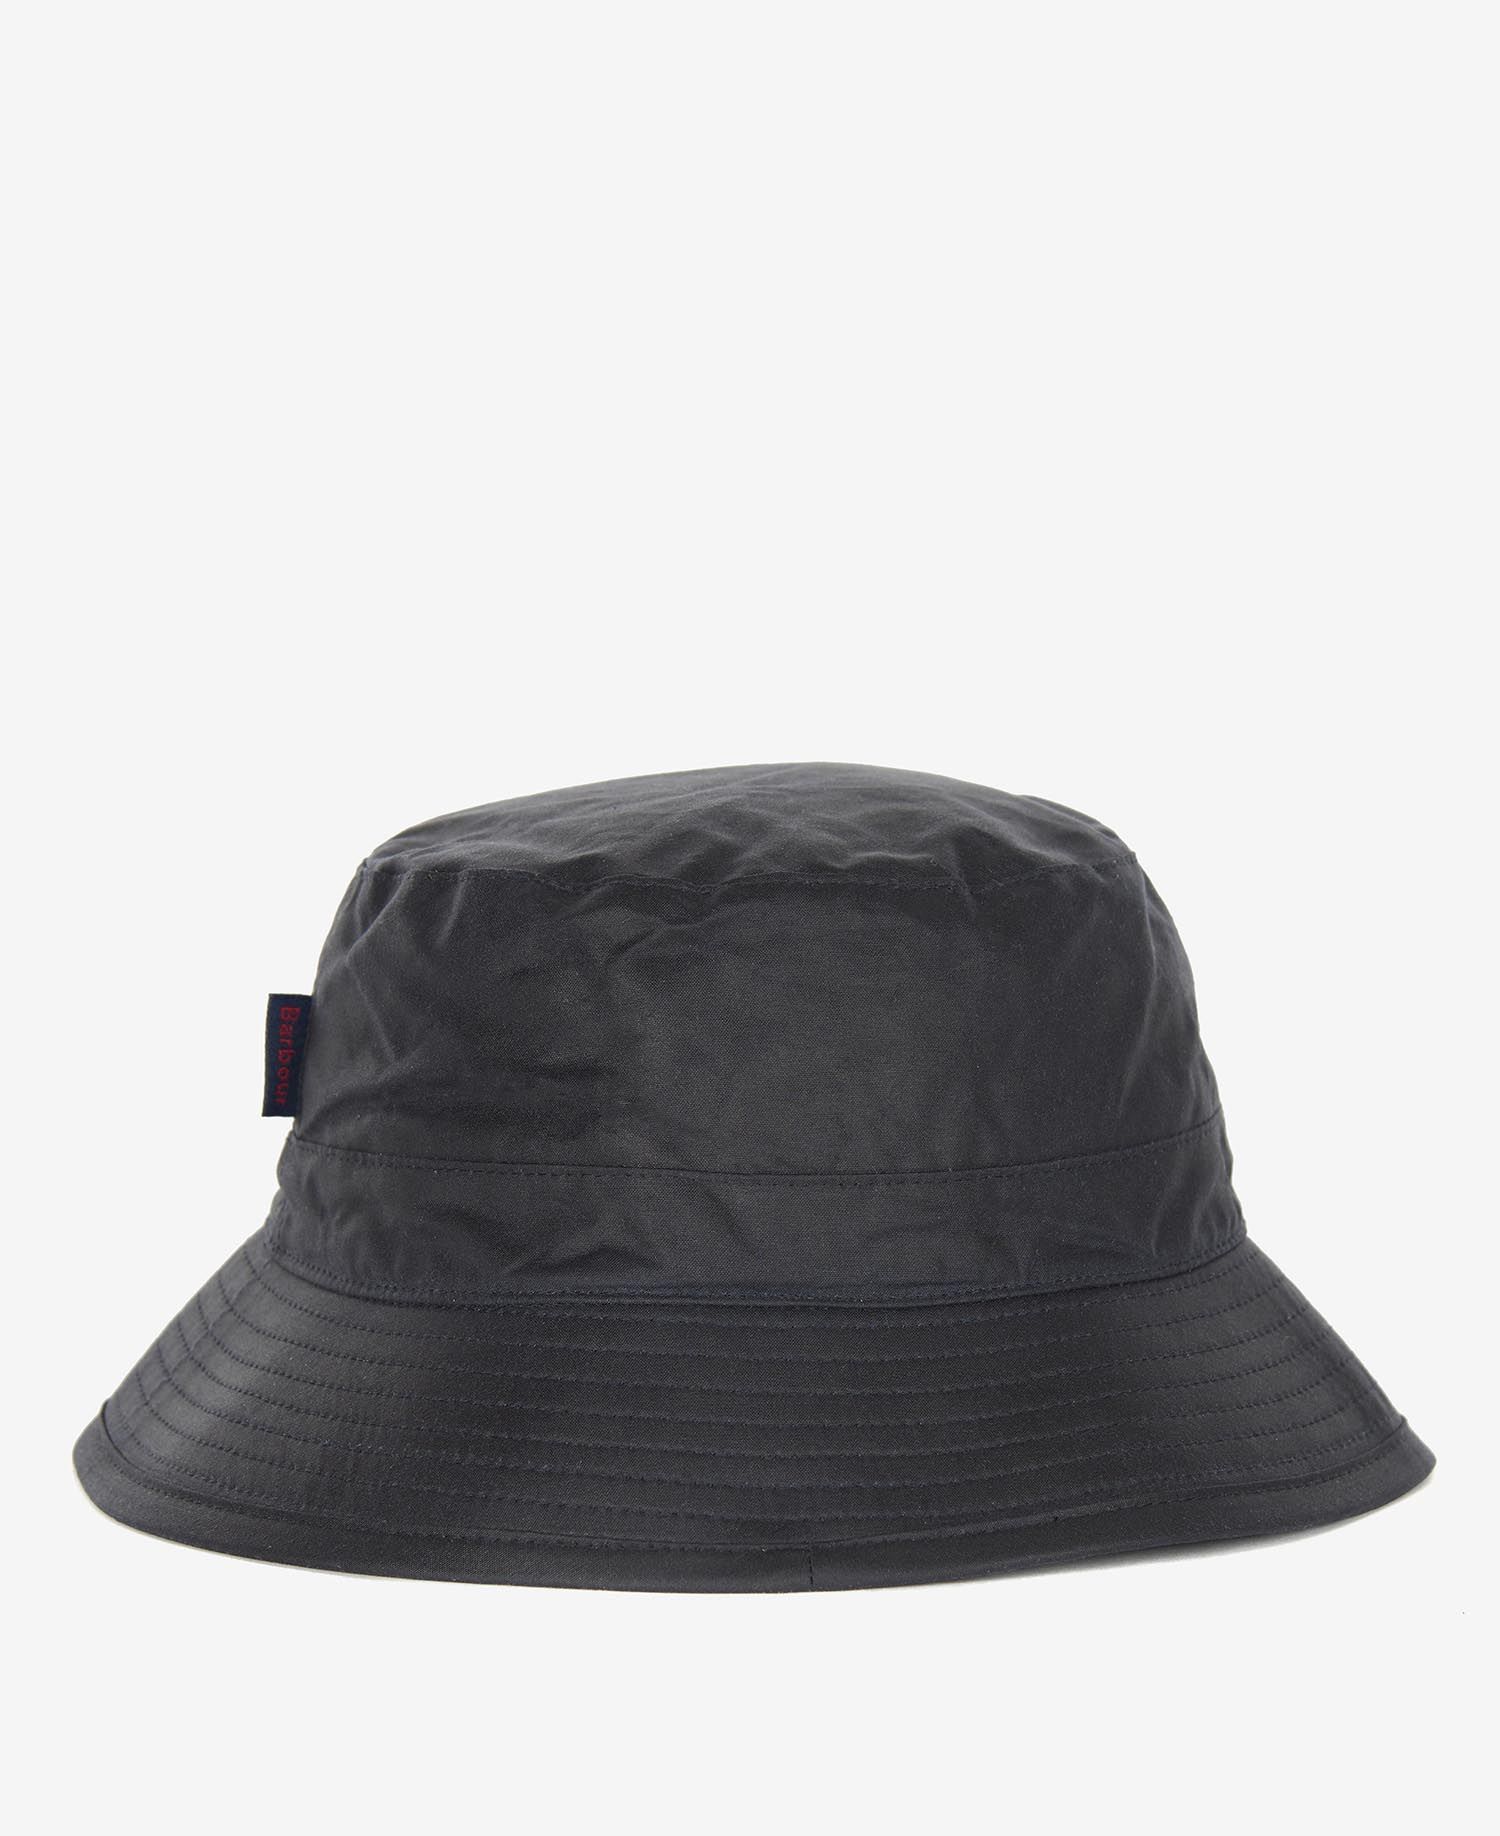 Barbour Wax Sports Hat | Barbour Waxed Hats – Sam Turner & Sons